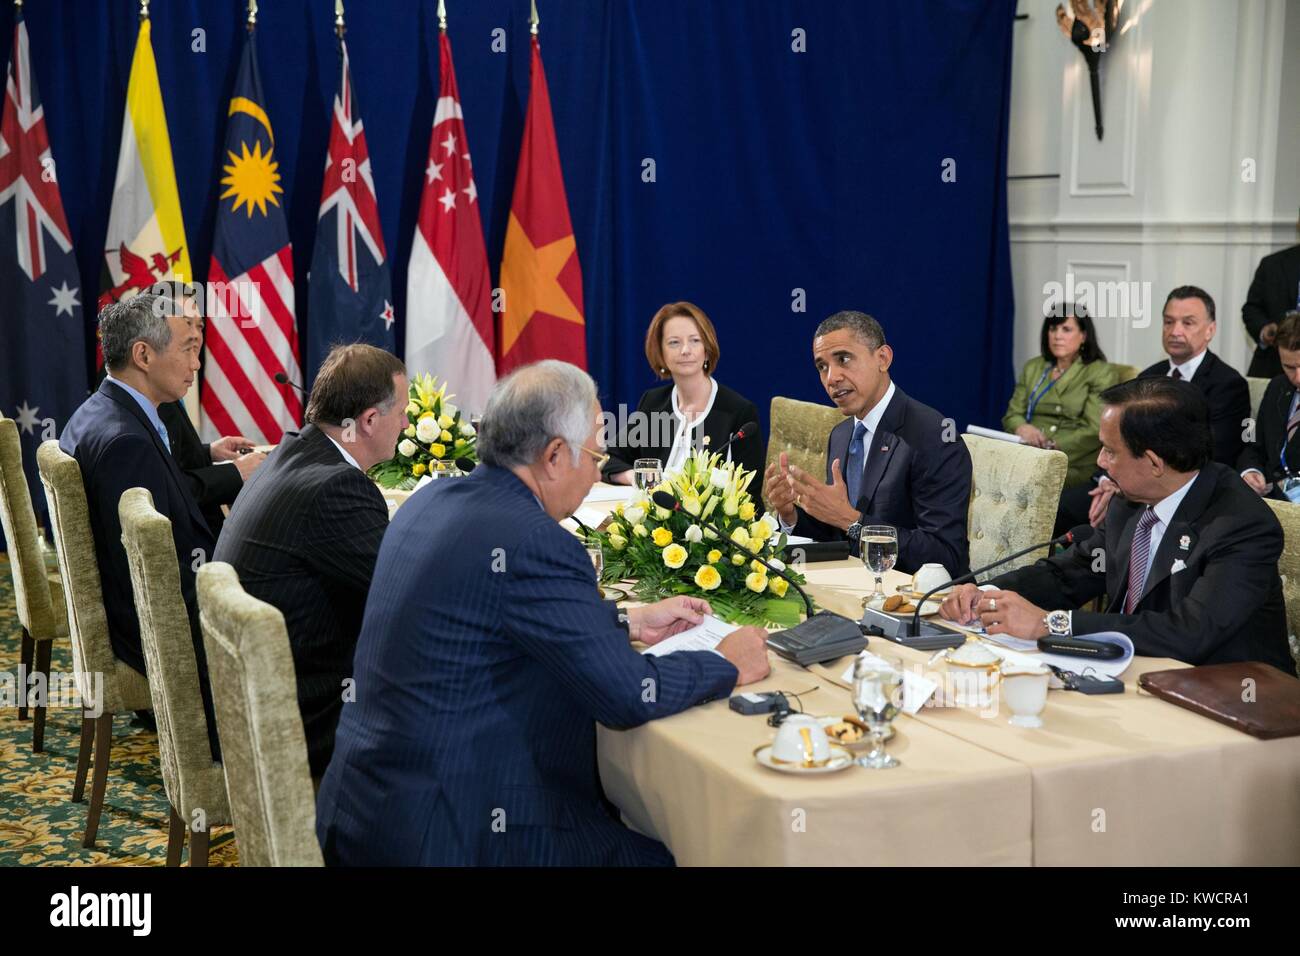 President Barack Obama at the ASEAN Summit at Peace Palace in Phnom Penh, Cambodia, Nov. 20, 2012. Taking part in the meeting, clockwise from the President, are: Sultan of Brunei Hassanal Bolkiah; PM Mohammed Najib Abdul Razak of Malaysia; PM John Key of New Zealand; PM Lee Hsien Loong of Singapore; PM Nguyen Tan Dung of Vietnam; and PM Julia Gillard of Australia. (BSLOC 2015 3 142) Stock Photo